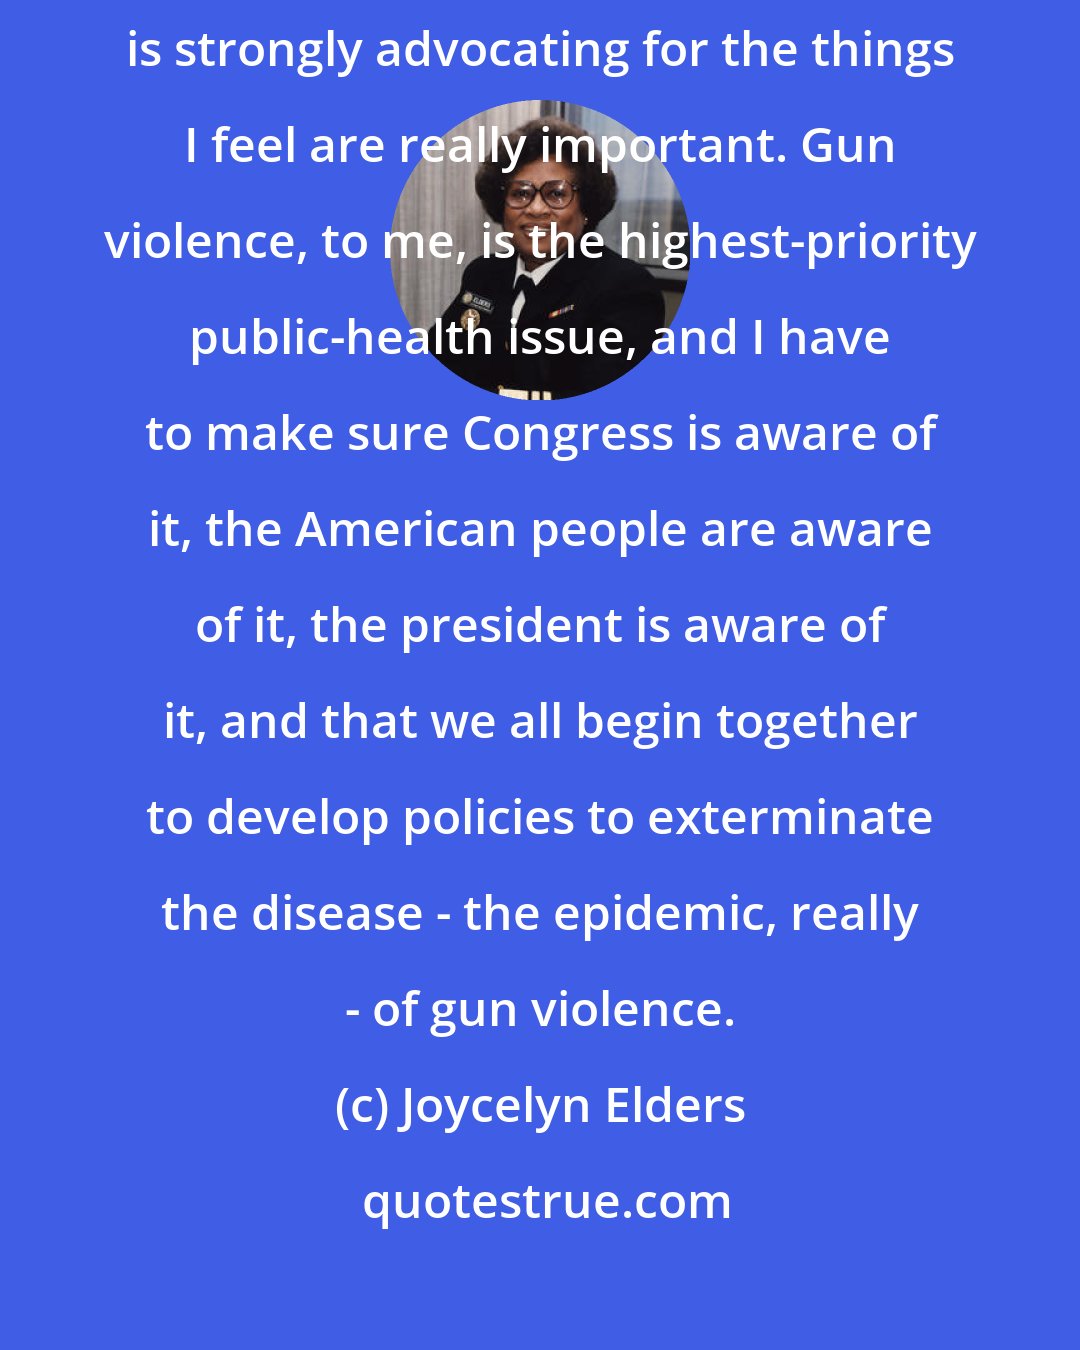 Joycelyn Elders: I've pretty much always used my positions as a bully pulpit. What that means is strongly advocating for the things I feel are really important. Gun violence, to me, is the highest-priority public-health issue, and I have to make sure Congress is aware of it, the American people are aware of it, the president is aware of it, and that we all begin together to develop policies to exterminate the disease - the epidemic, really - of gun violence.